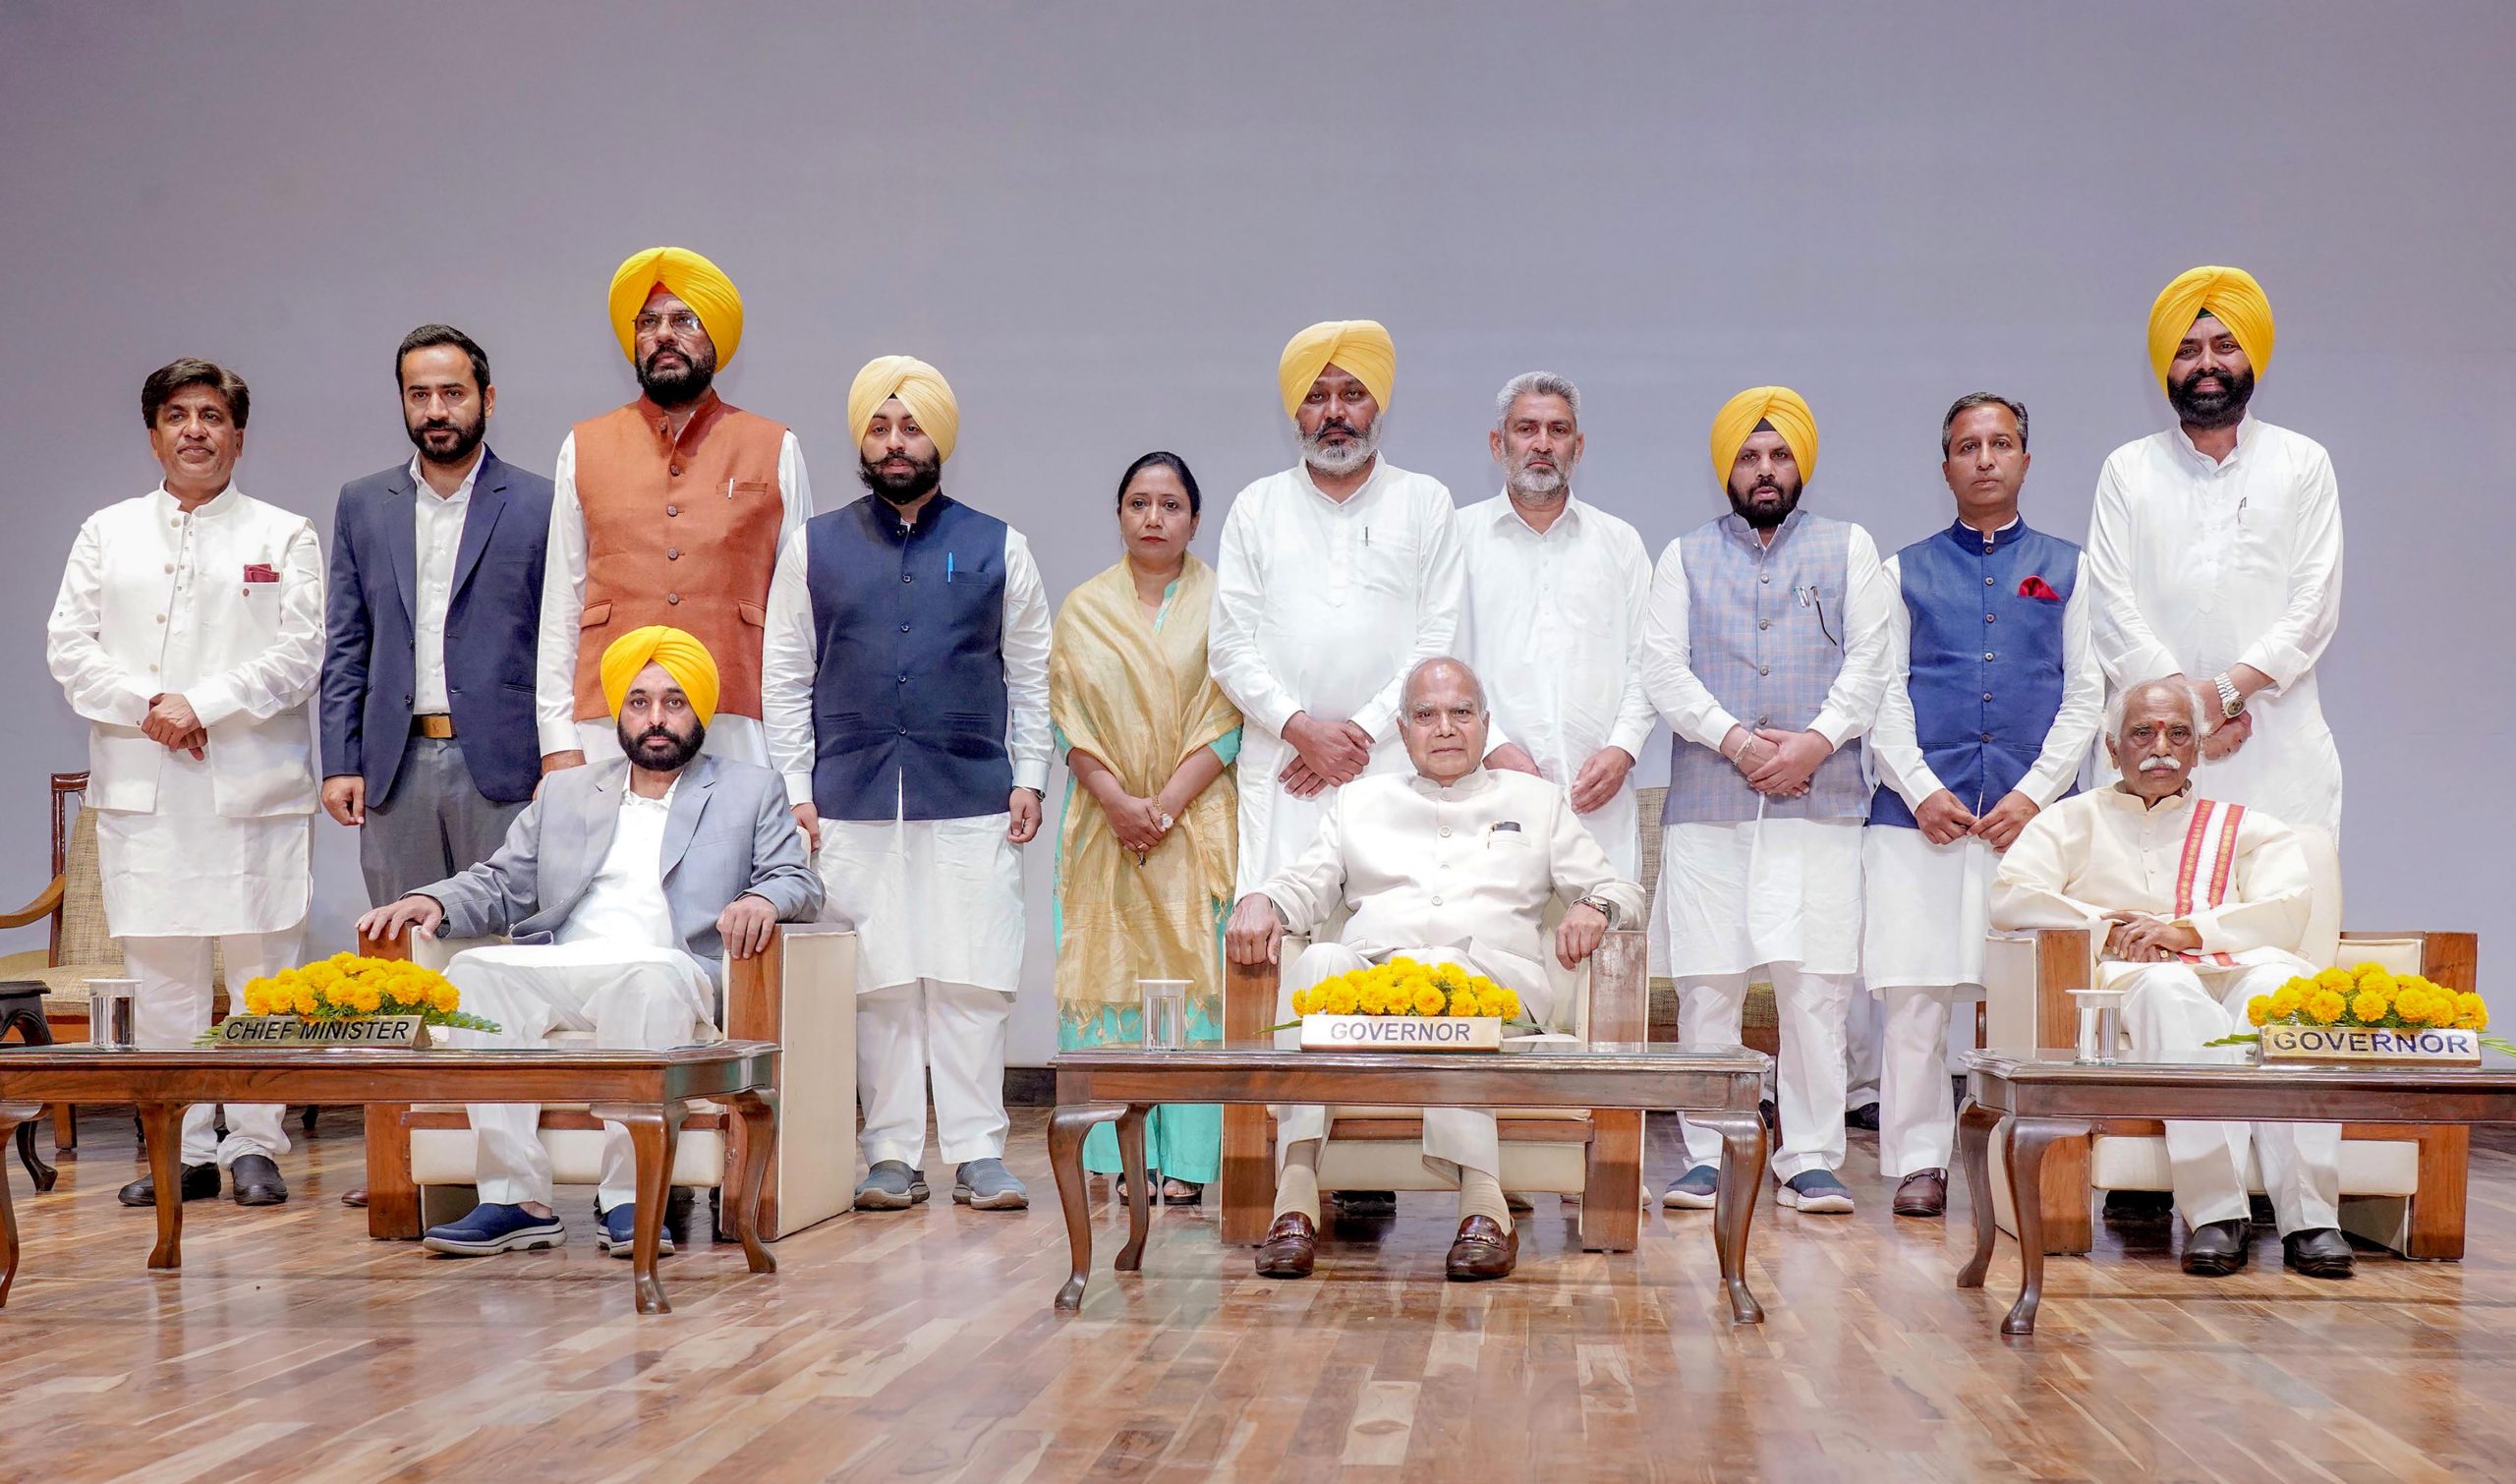 Punjab Cabinet: Seven of 11 ministers face criminal cases, 9 of them are crorepatis